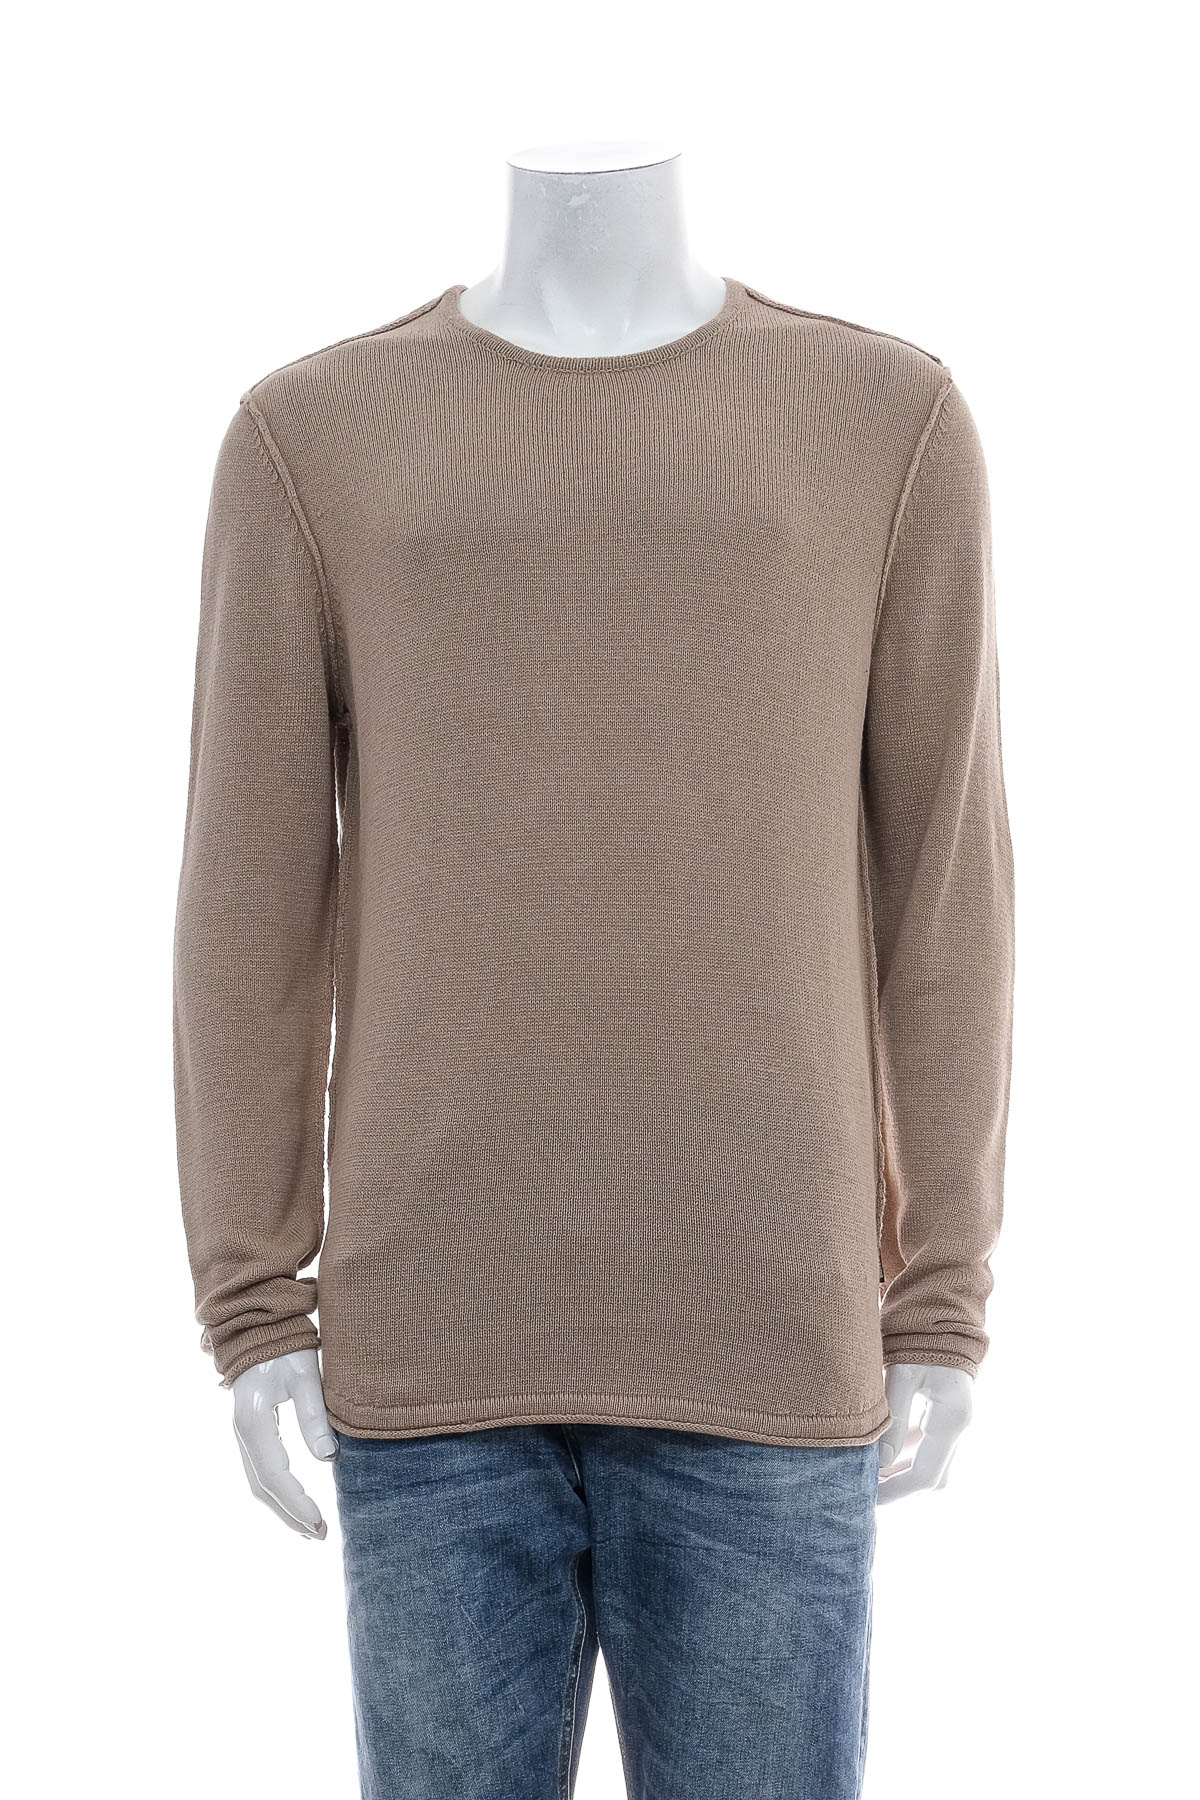 Men's sweater - ONLY & SONS - 0